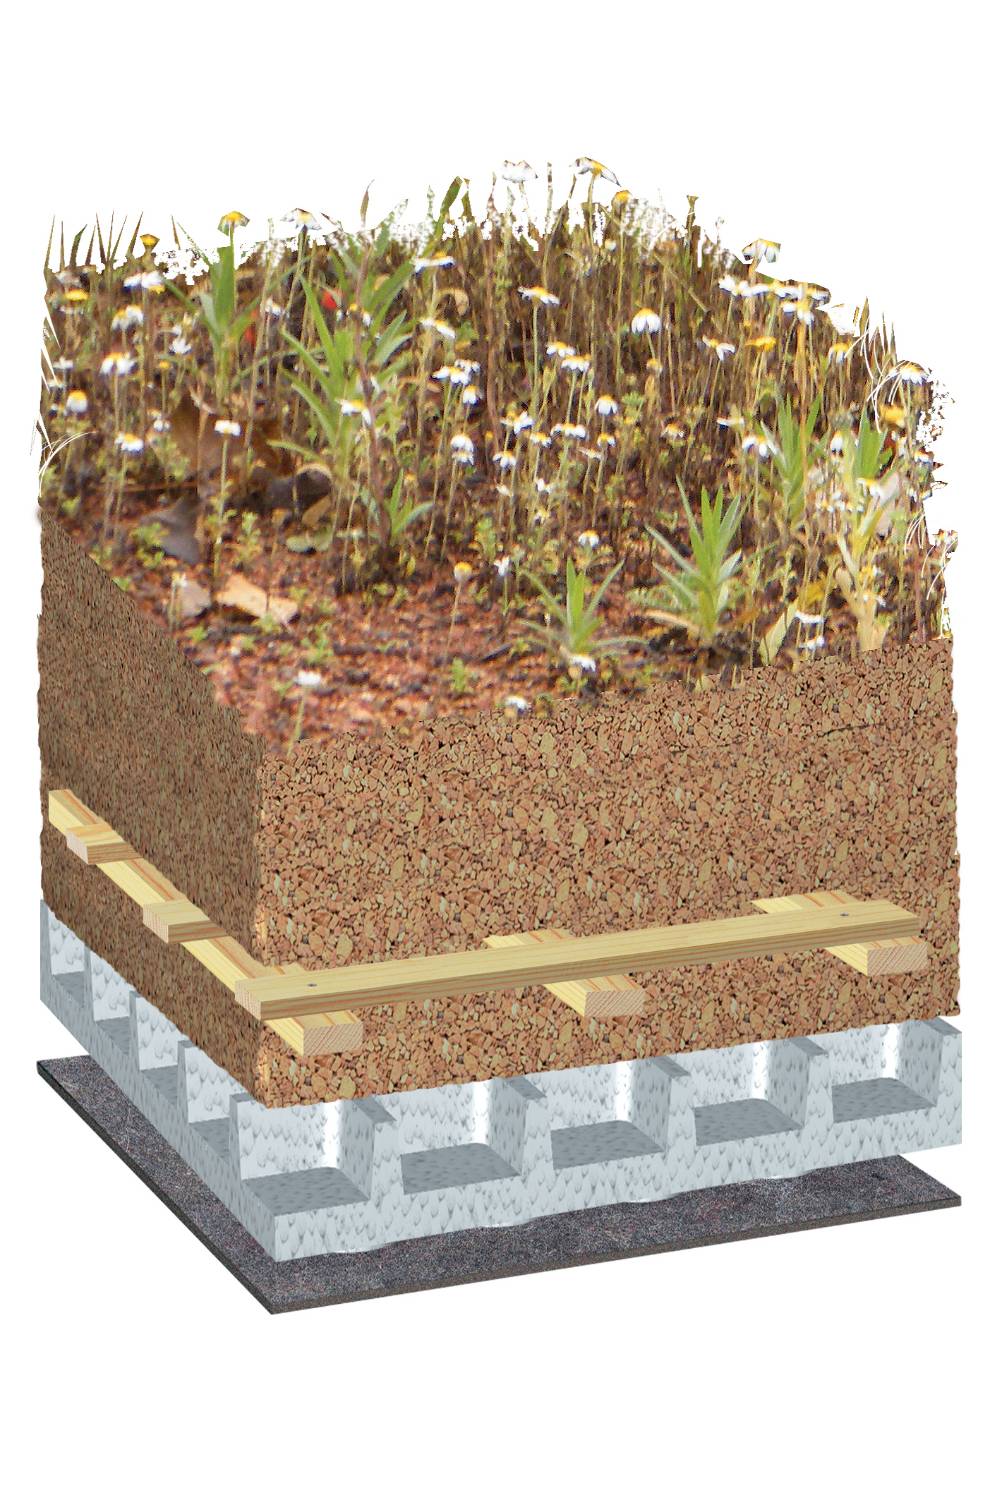 Bauder Flora Seed Mix Biodiverse Green Roof System, Pitched Roof